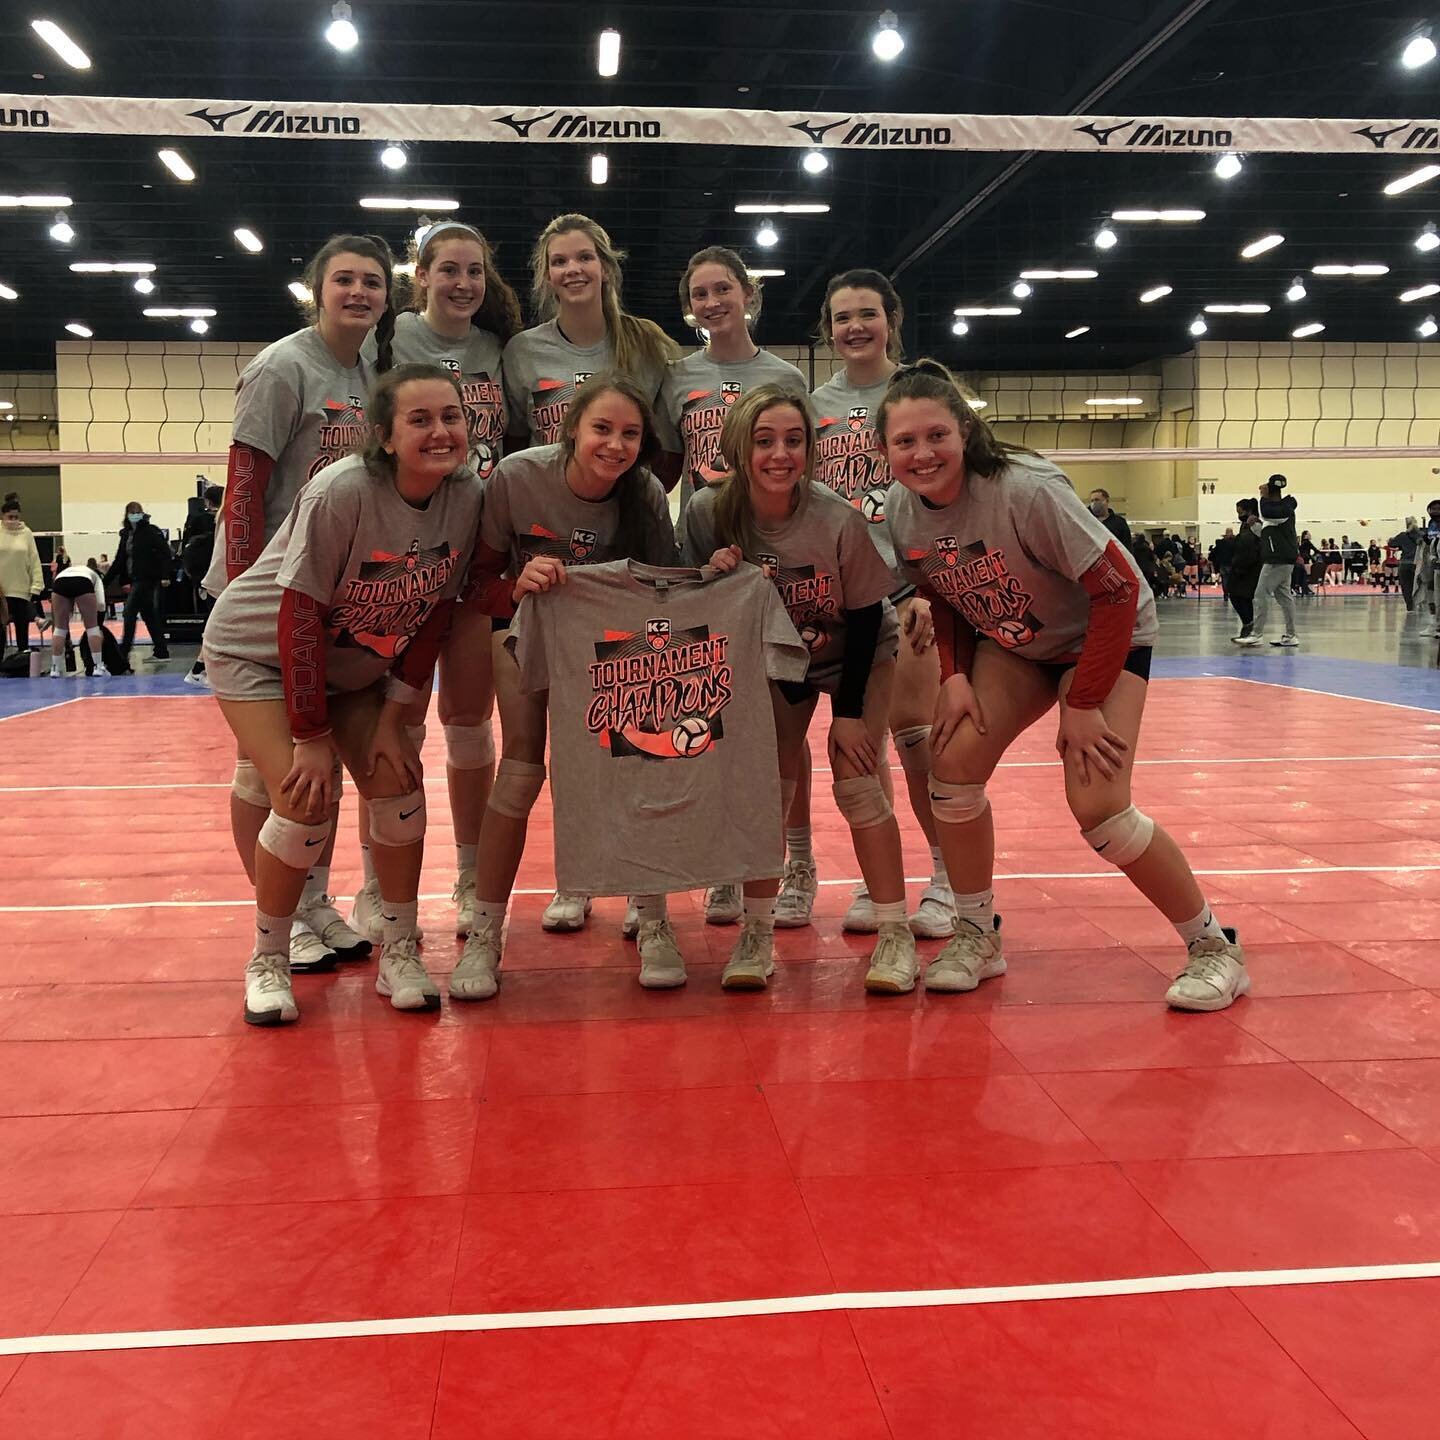 Congratulations 16 Red for coming in first in Silver at 17s Division K2 Presidents Day Bash! #k2volleyball #volleyball #volleyballplayer #roanokeunited